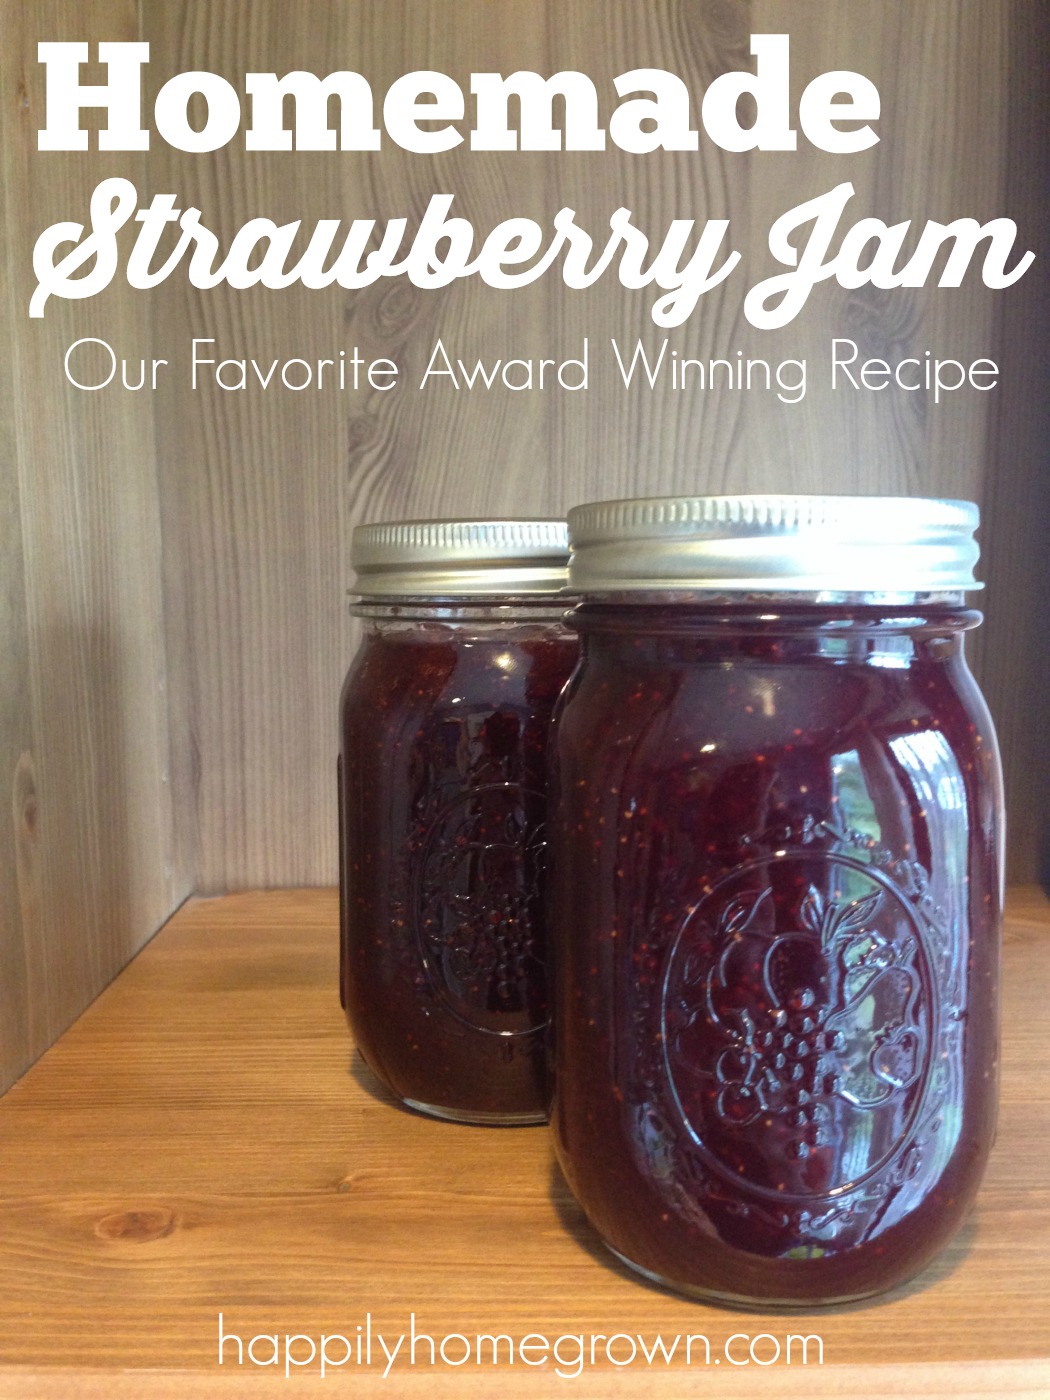 The only thing better than a strawberry fresh from the garden is a bite of homemade strawberry jam in the middle of winter! You can capture summer in a jar with this award winning recipe.